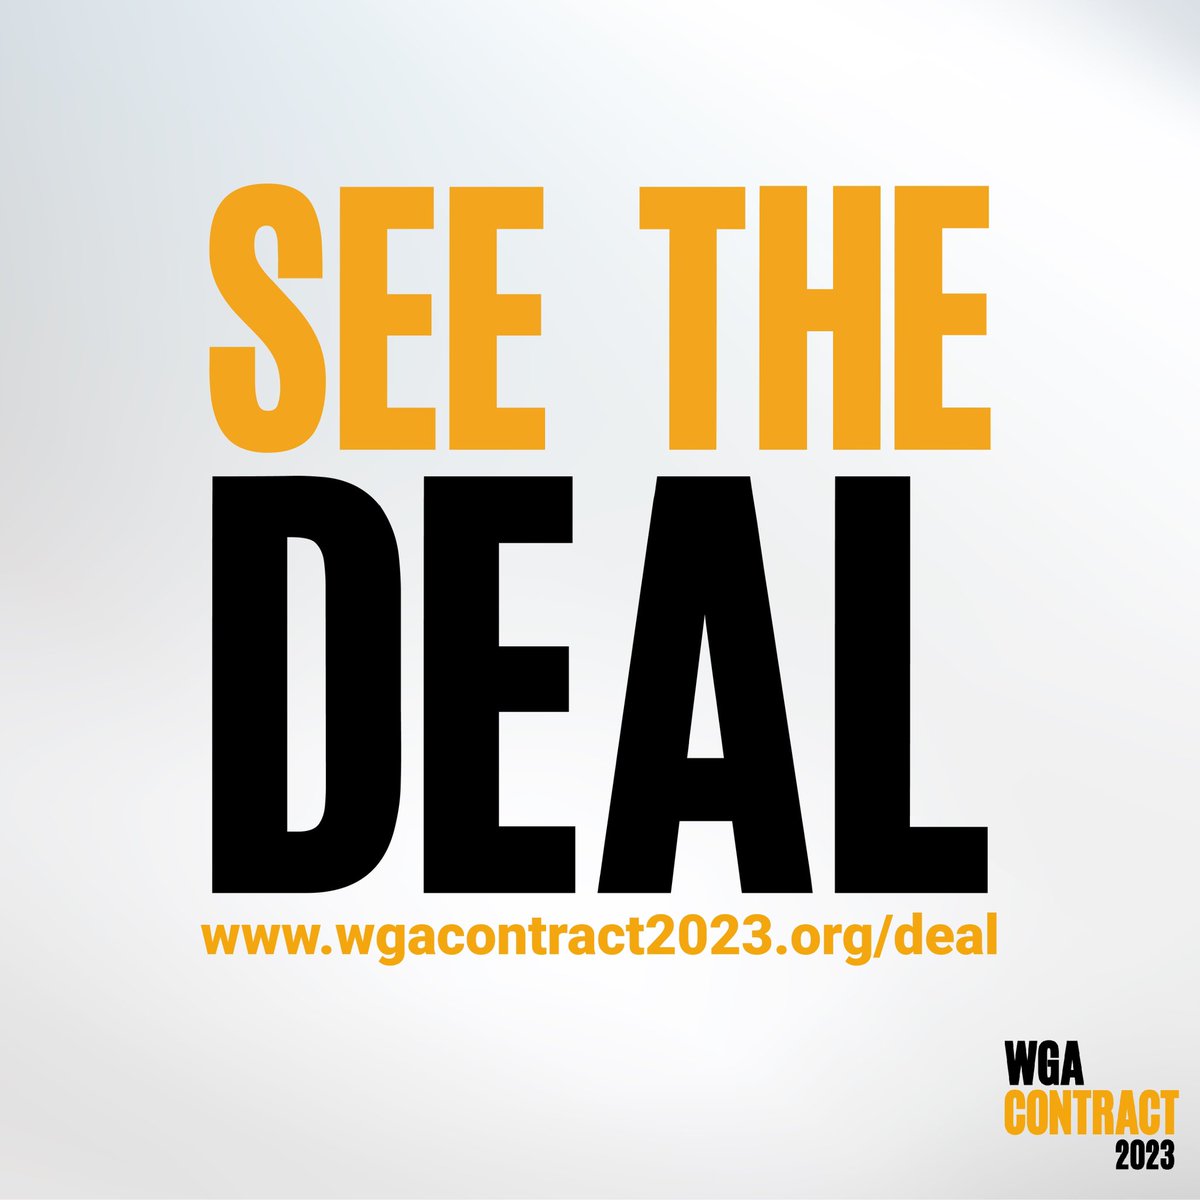 See the deal at wgacontract2023.org/deal ✊ #WGAStrong